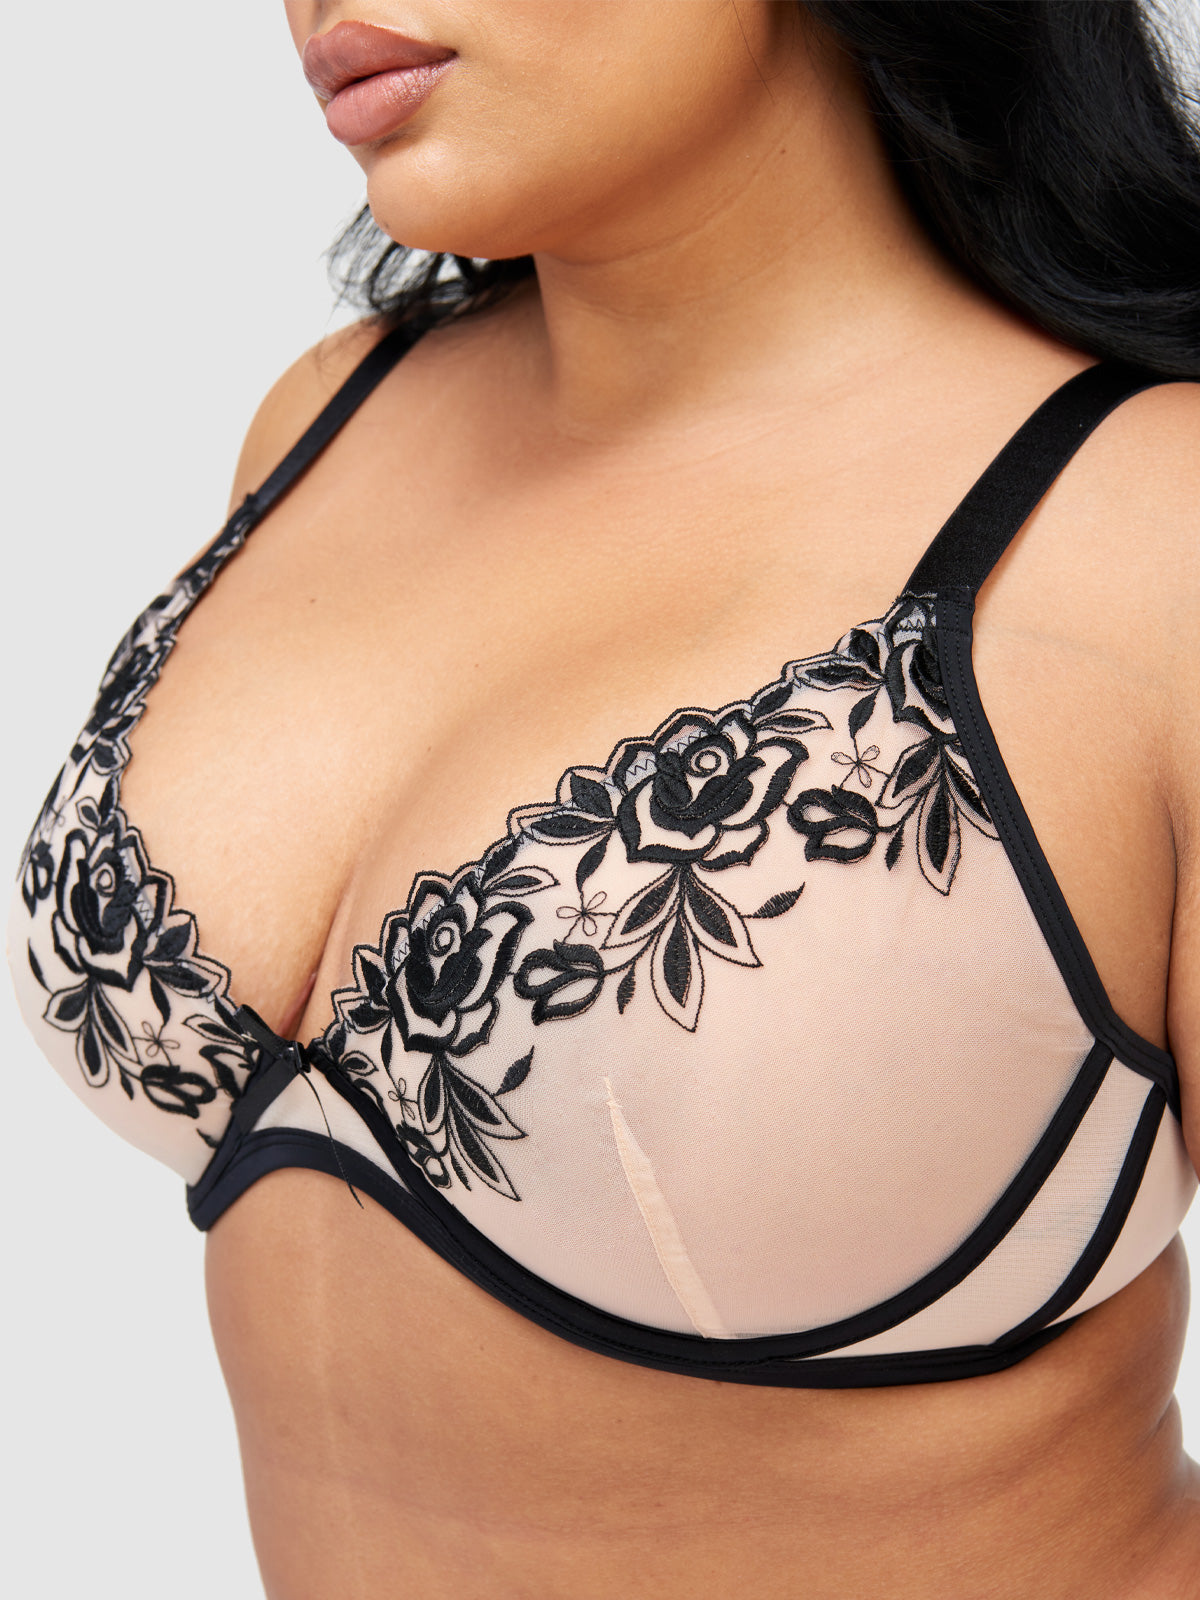 You don't need Hollywood! Come to MrBra for plus size bras and forms!